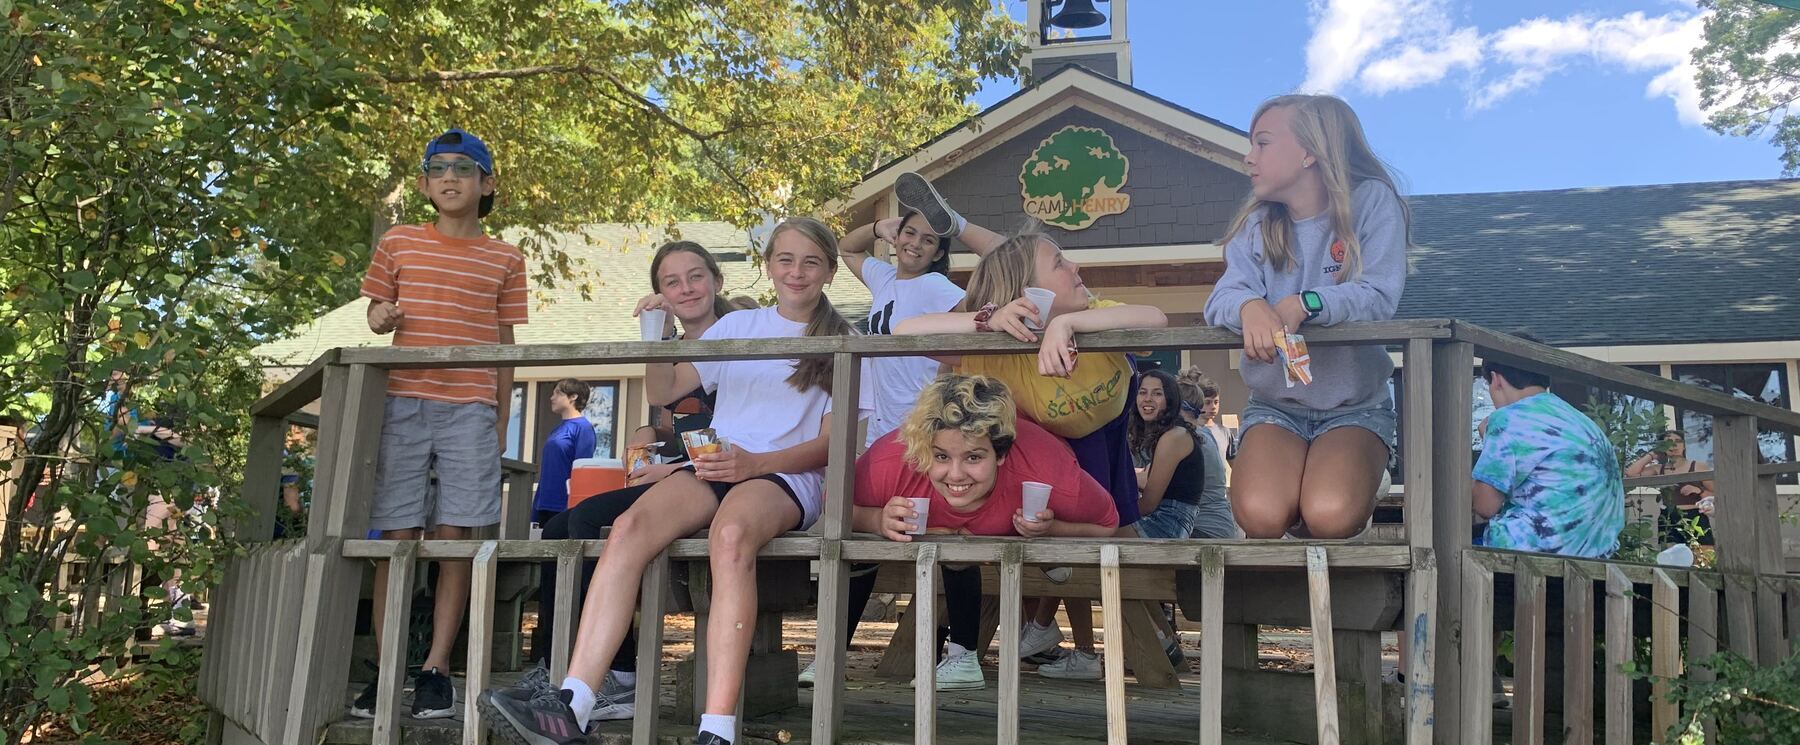 A group of middle school students sit on a deck and smile through the railings.